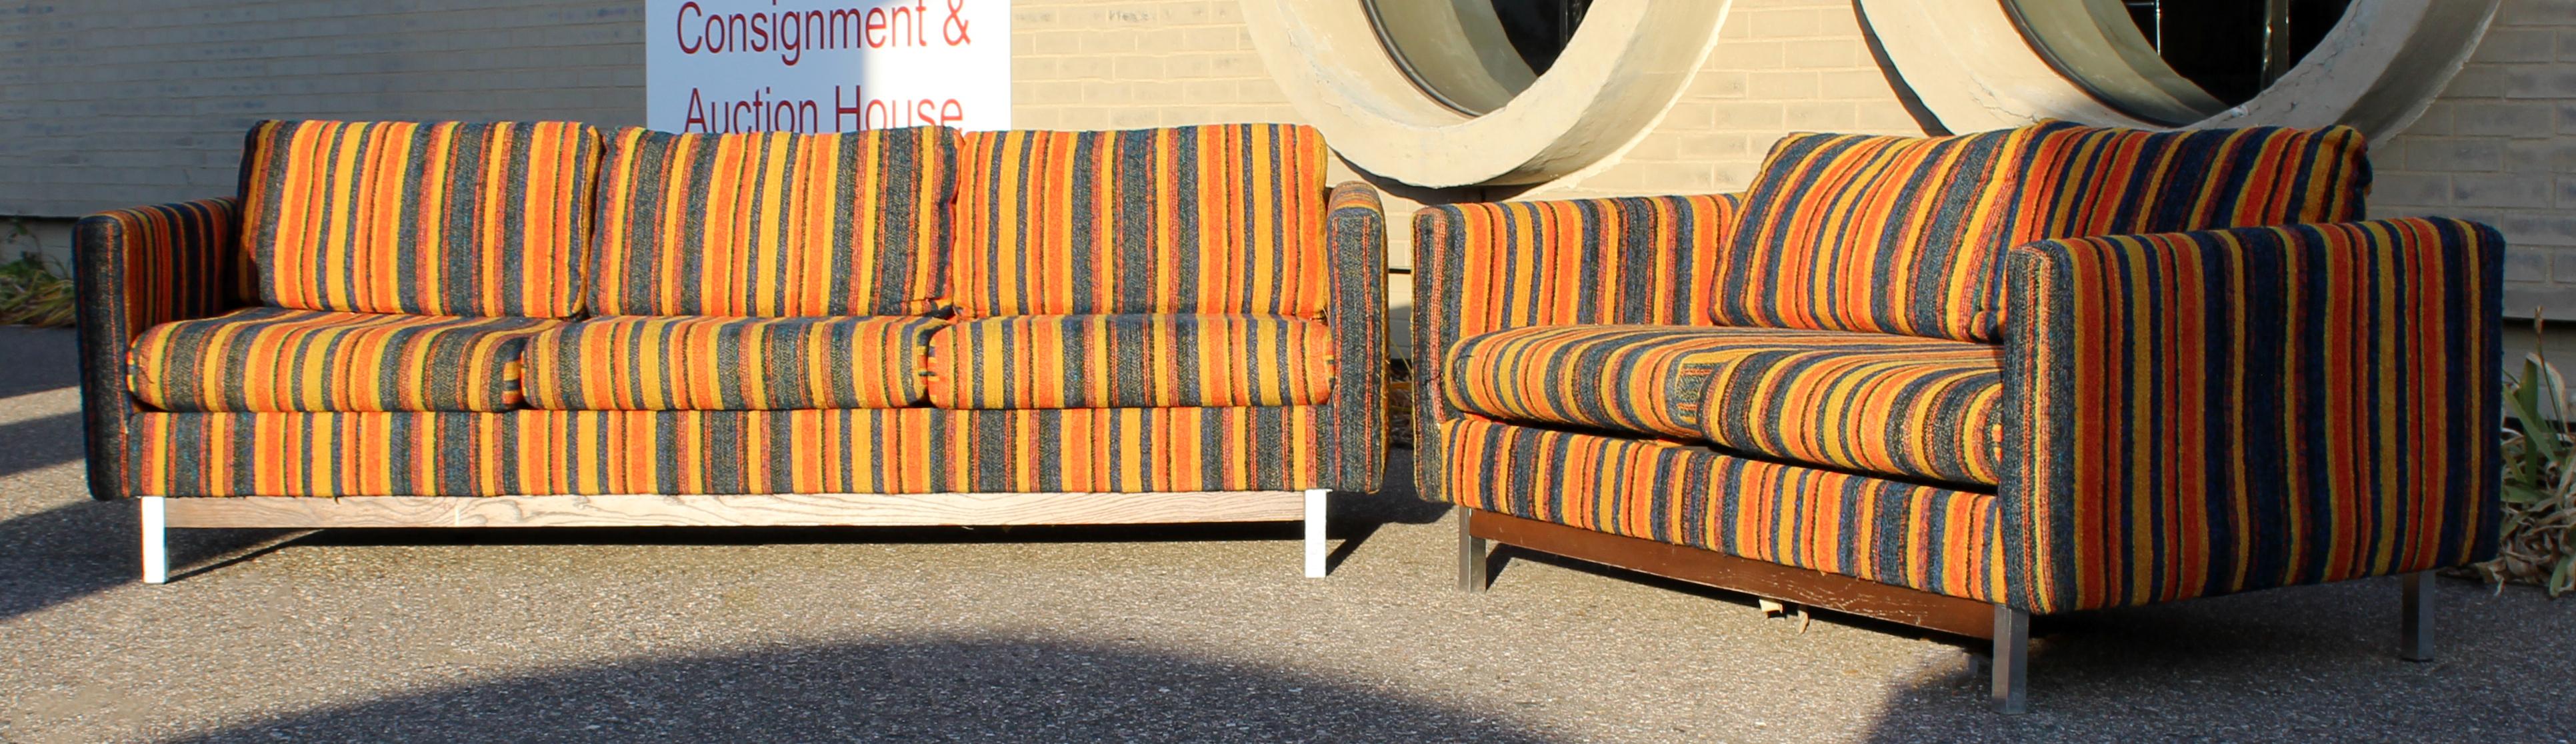 For your consideration is a spectacular pair of striped sofas, one three seat and one two seat, by Selig Monroe, made in Denmark, circa 1960s. In vintage condition. The dimensions of the sofa are 85